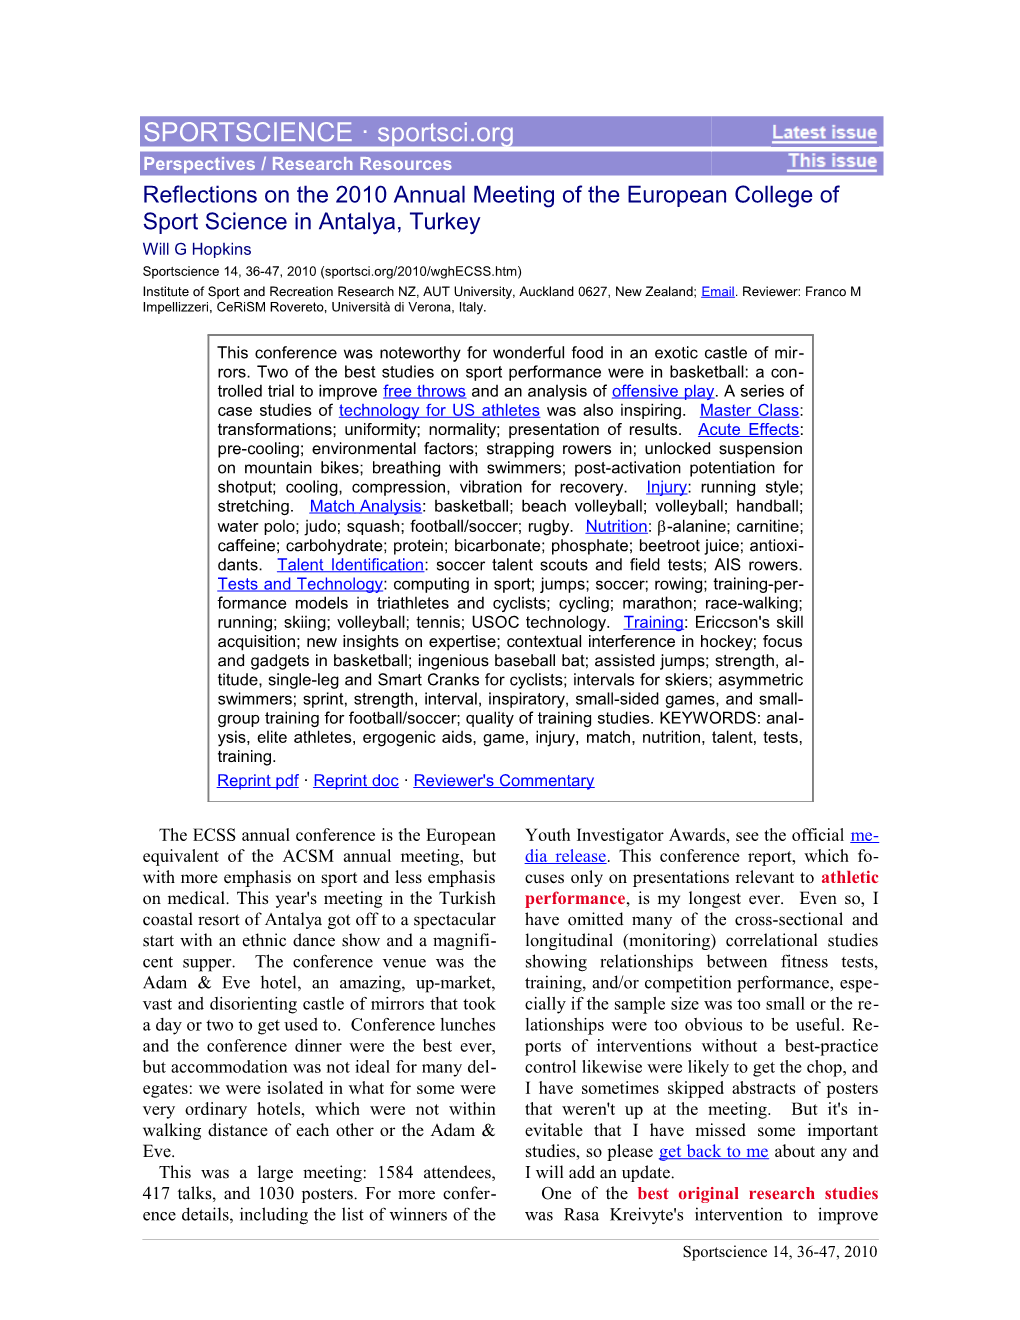 Reflections on the 2010 Annual Meeting of the European College of Sport Science in Antalya